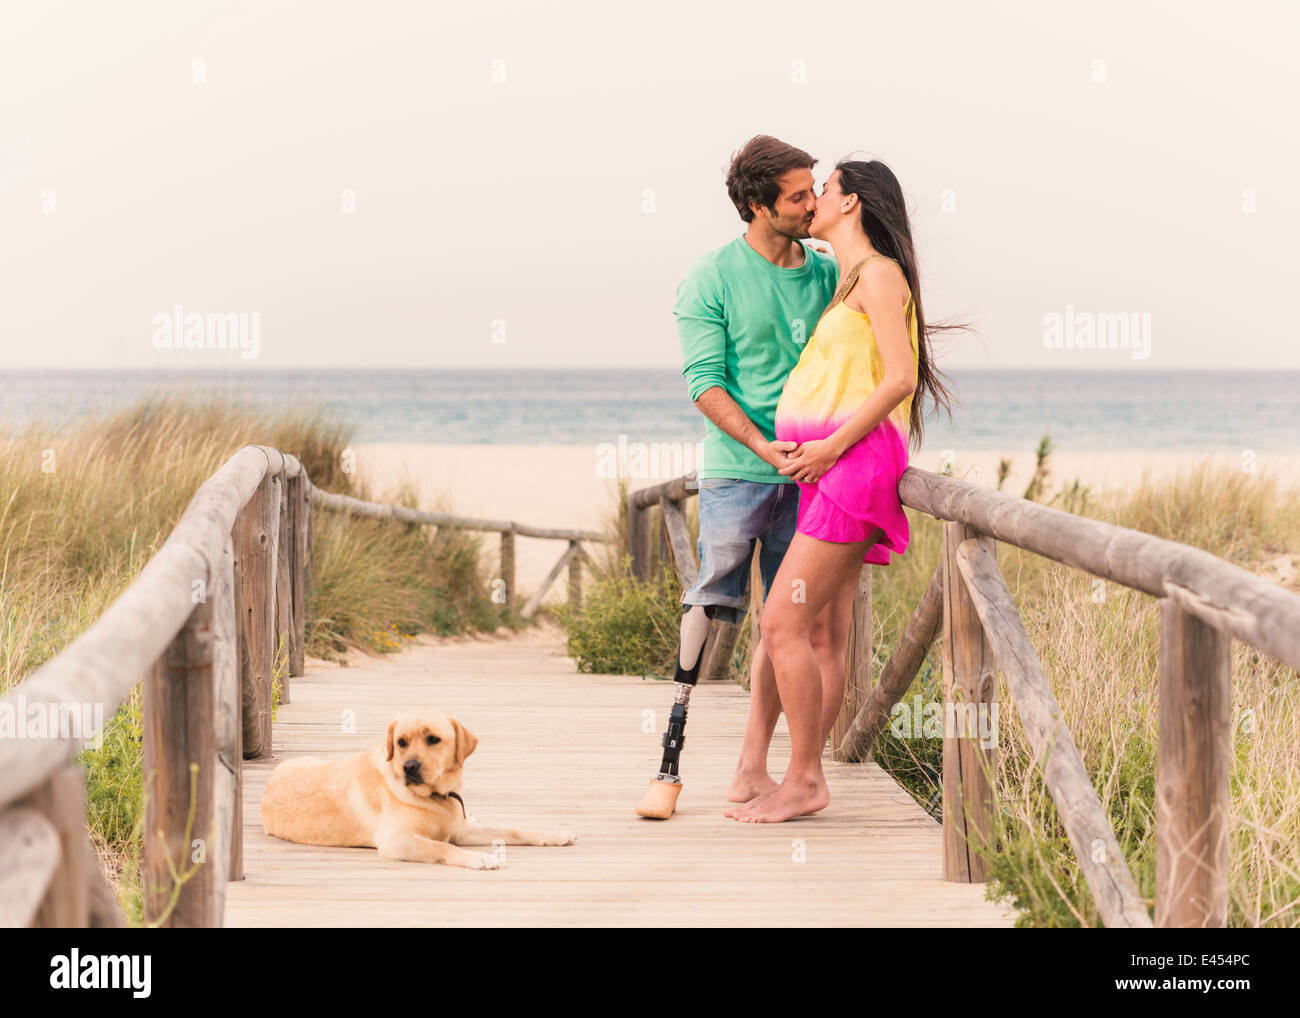 Disabled man and pregnant woman. A Couple in Love. Stock Photo